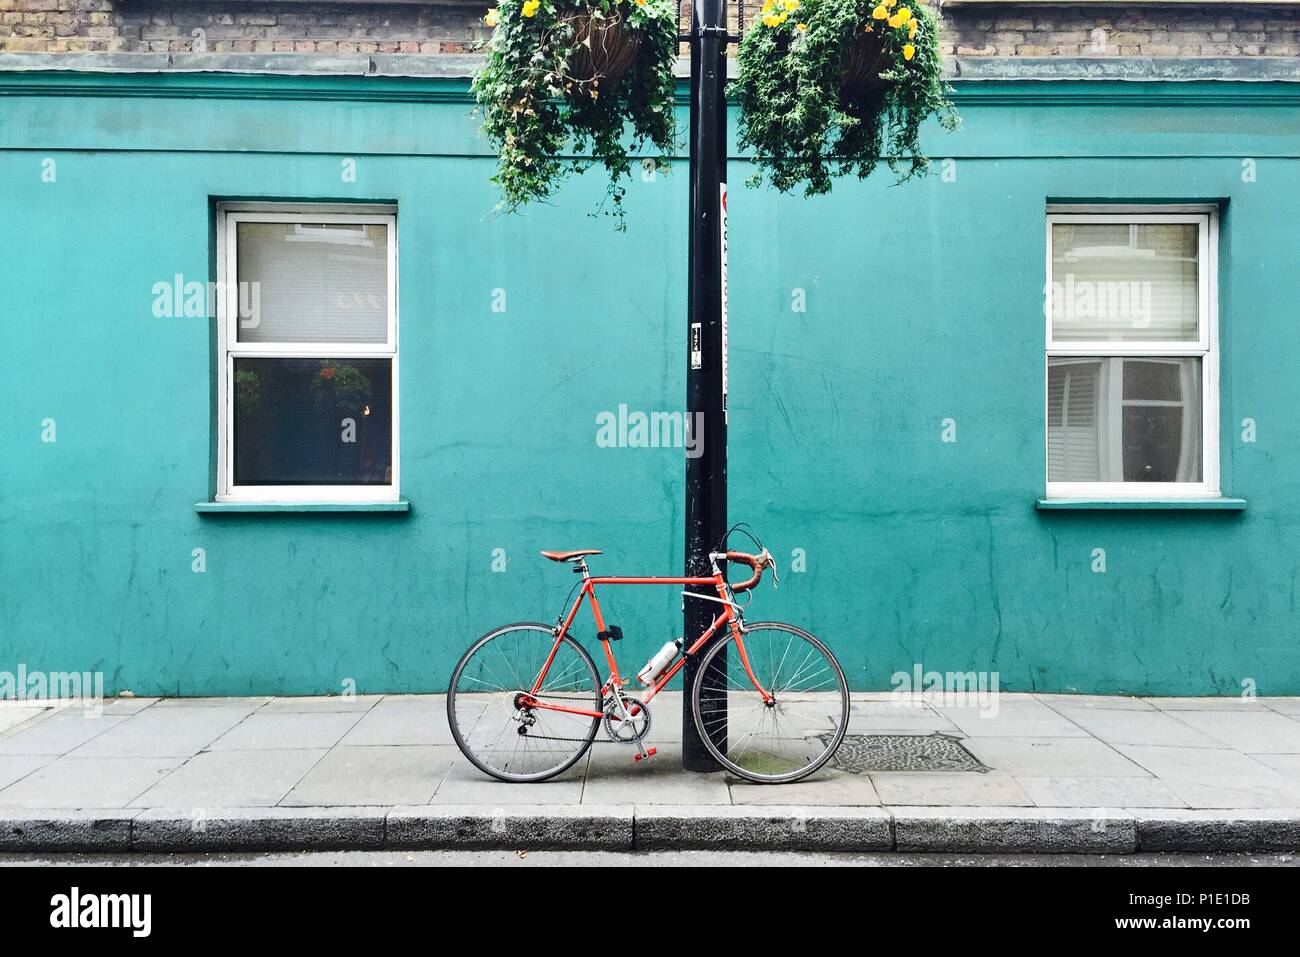 Orange racing bicycle against a teal  turquoise wall Stock Photo